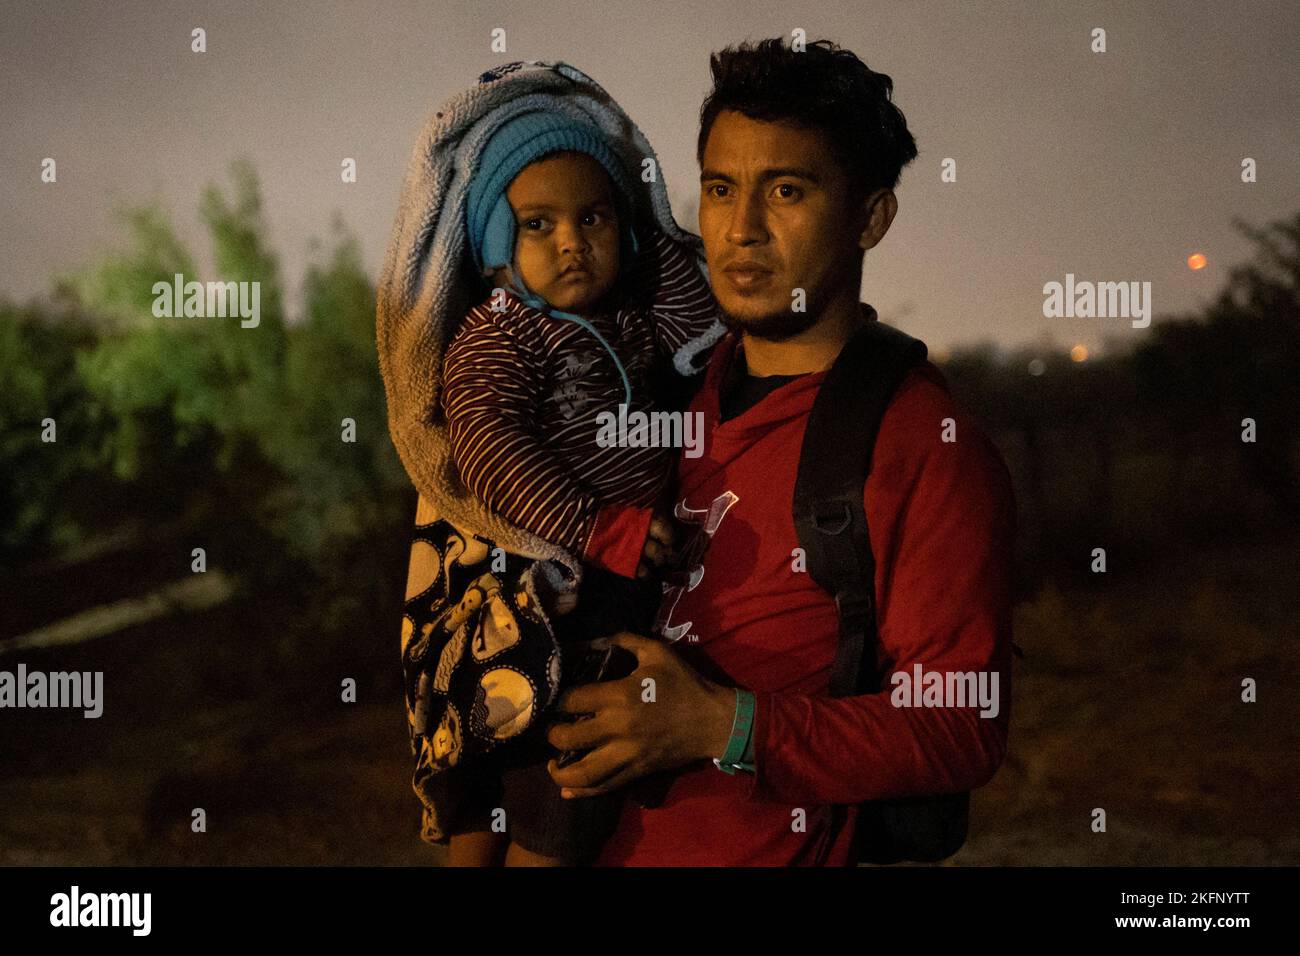 Edgar, an asylum seeking migrant from Honduras, holds his two year old son Liam as he awaits to surrender to border agents after being smuggled across the Rio Grande river from Mexico into Roma, Texas, U.S., November 18, 2022.  REUTERS/Adrees Latif     TPX IMAGES OF THE DAY Stock Photo